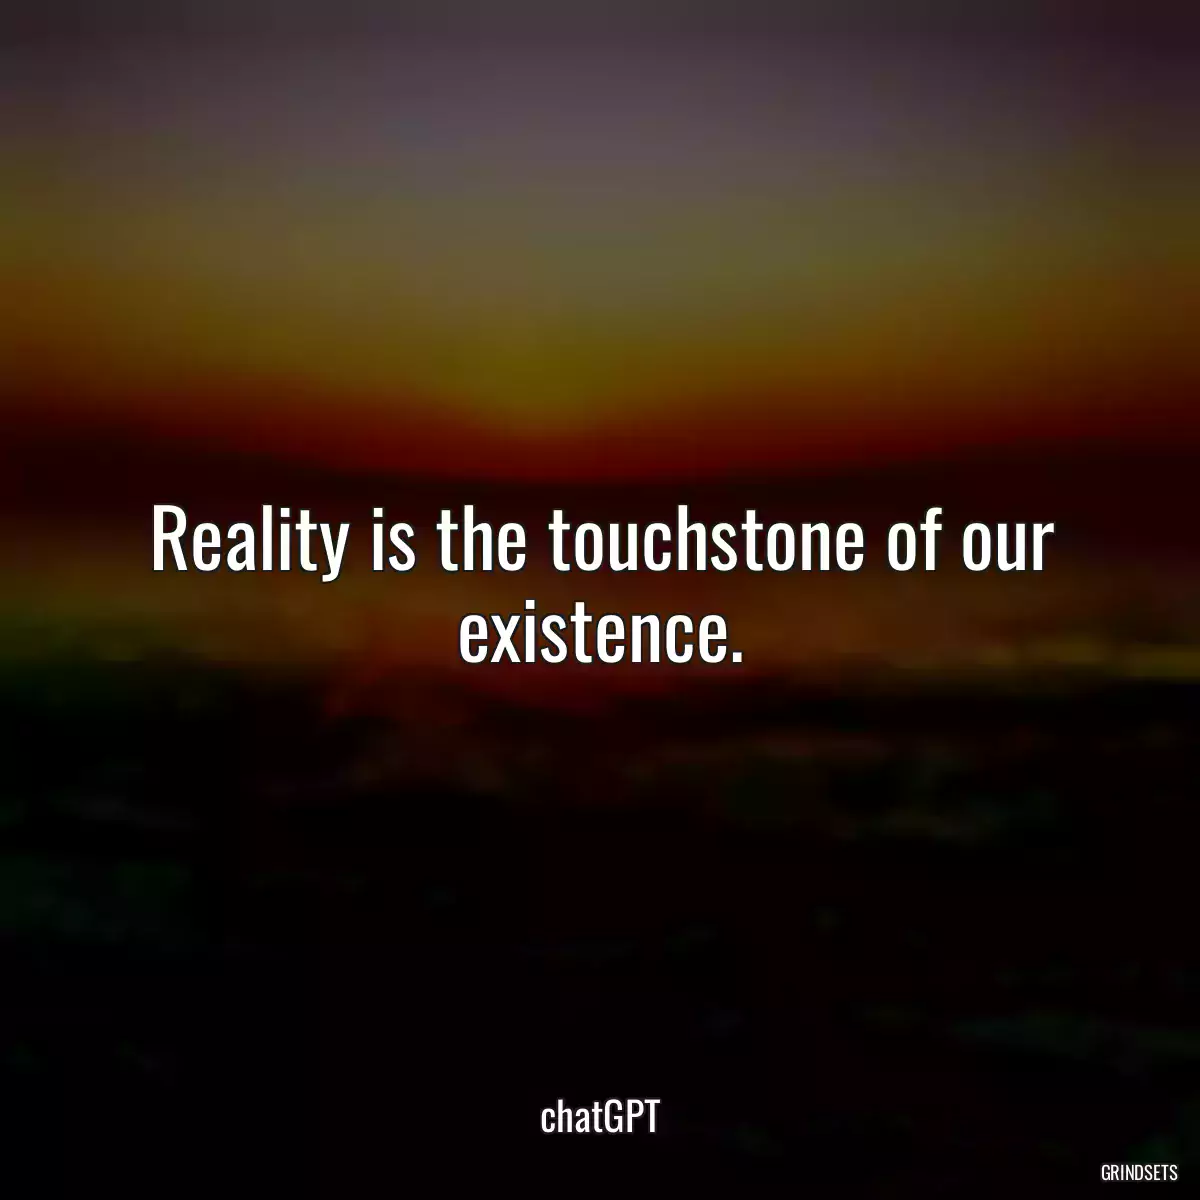 Reality is the touchstone of our existence.